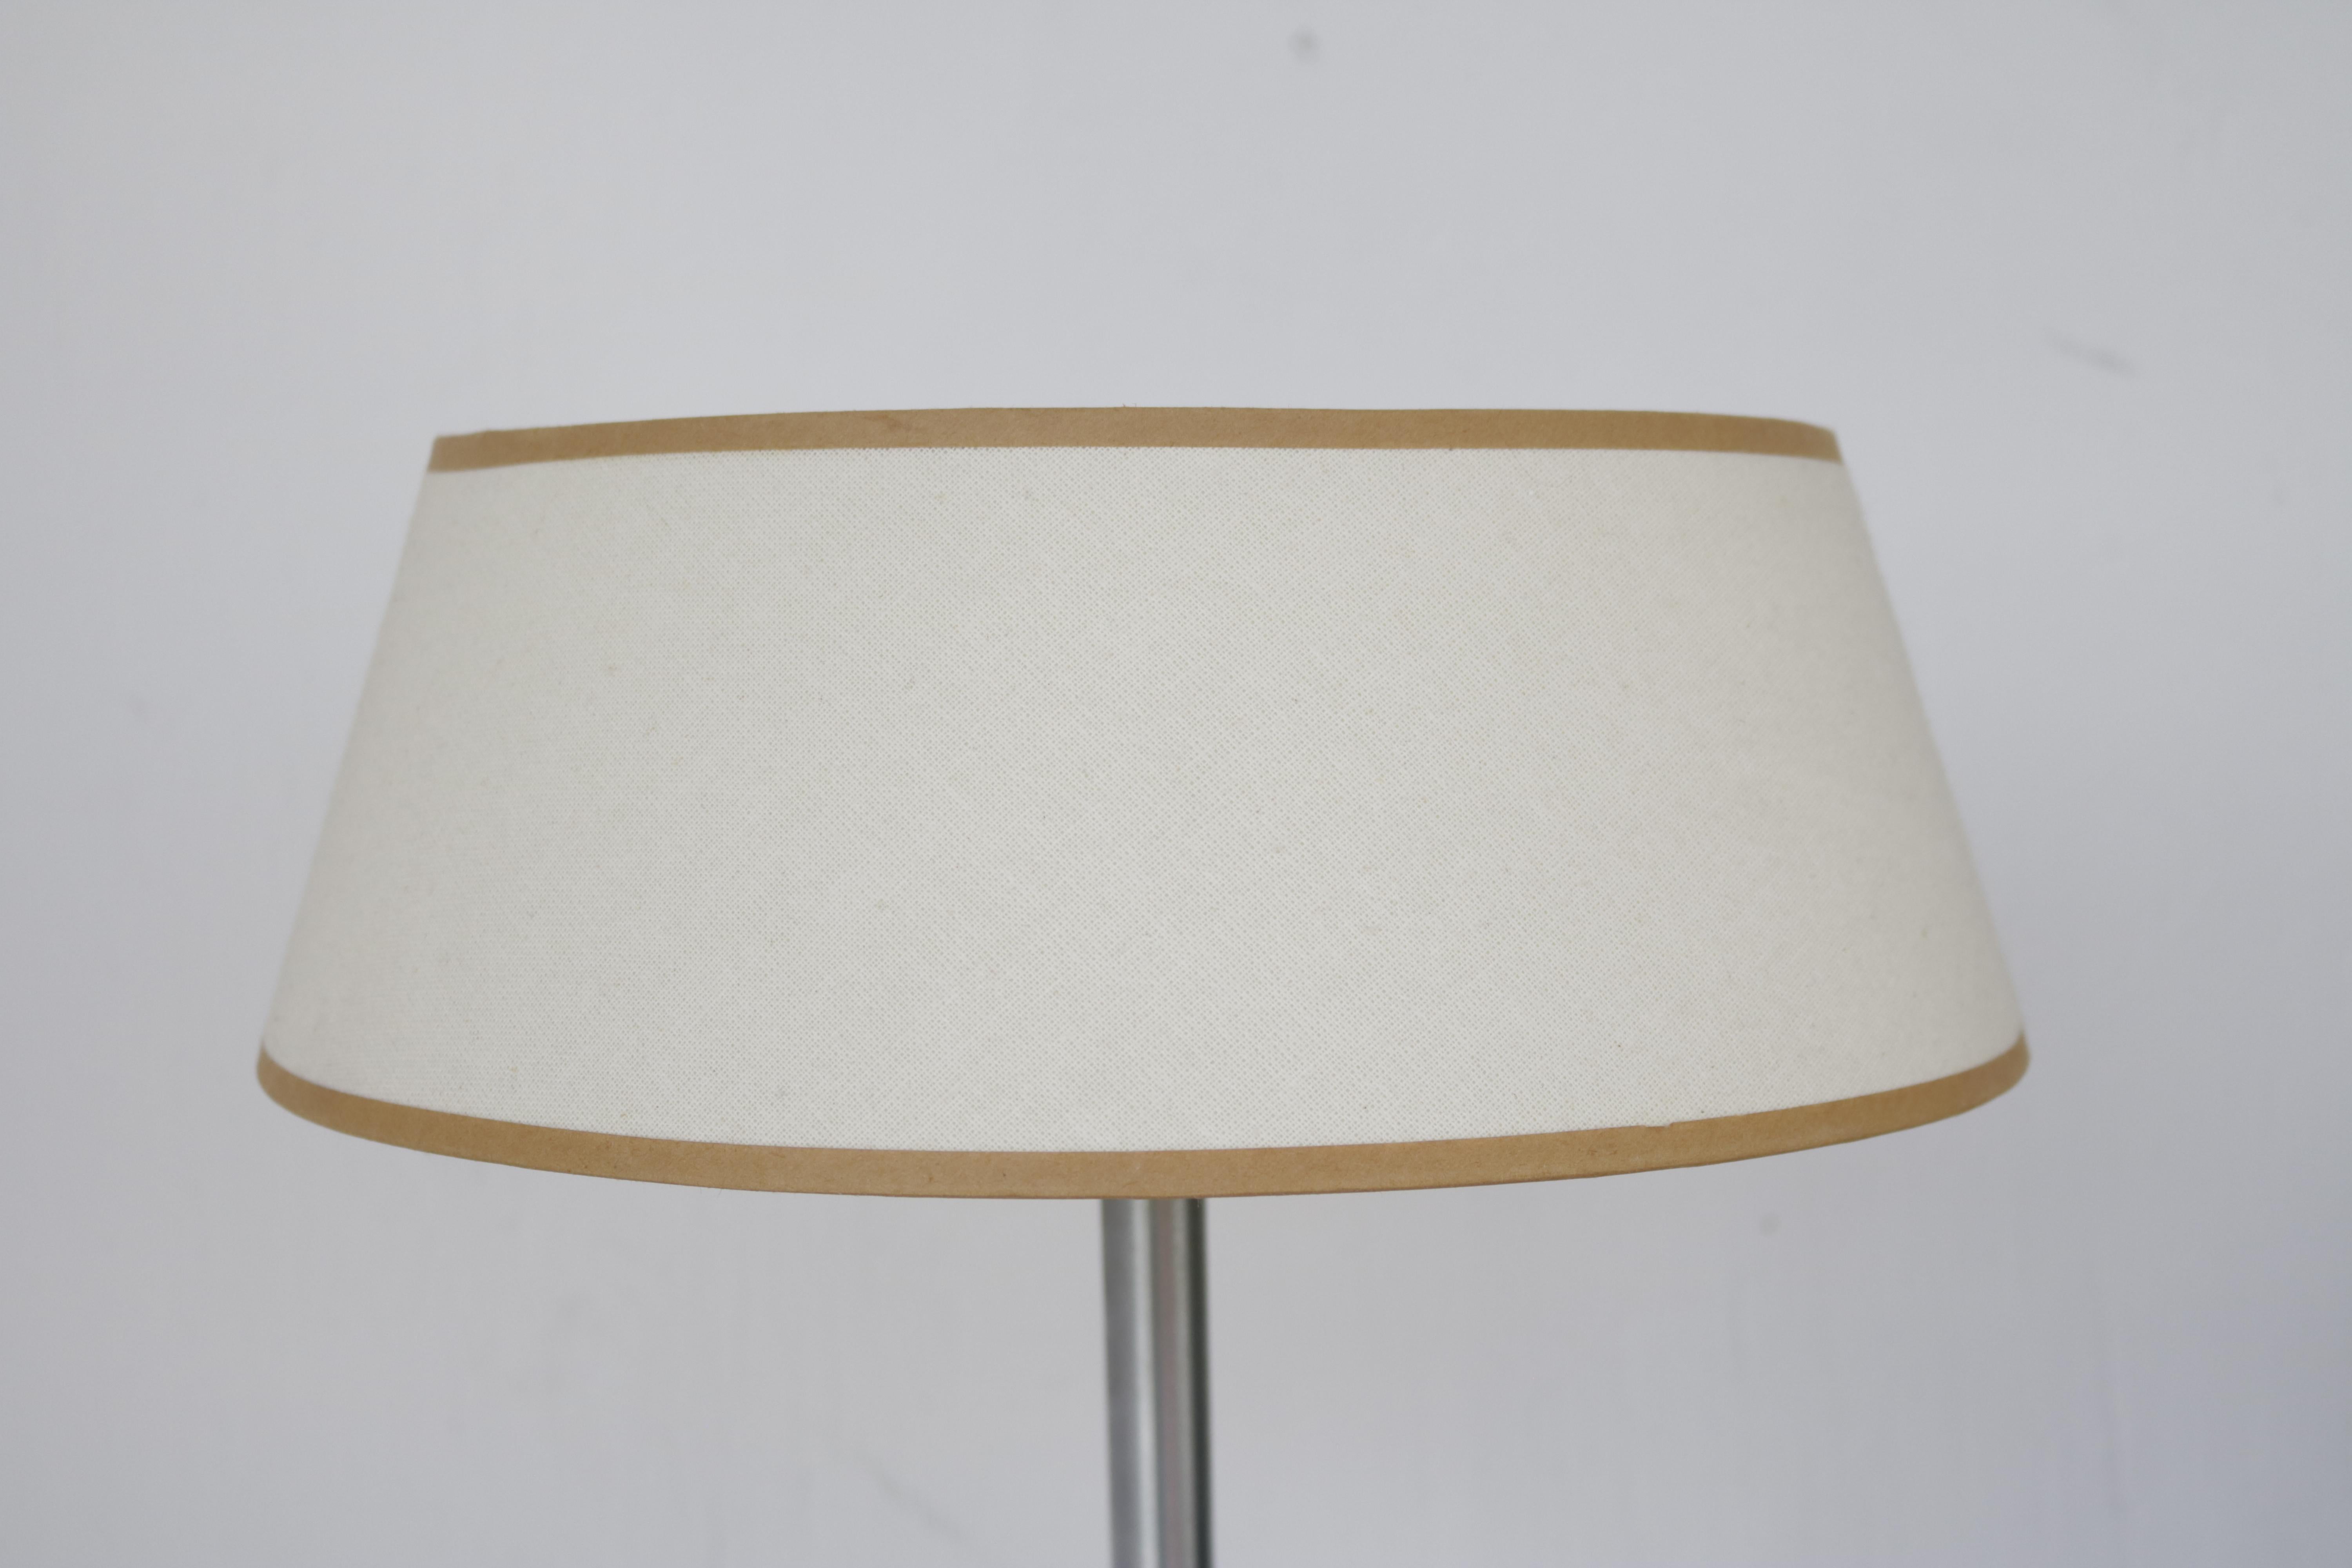 A Walter Von Neesen simple table lamp with brushed steel stand and its original lampshade with mustard yellow outlines.
Measures: Shade diameter is 14